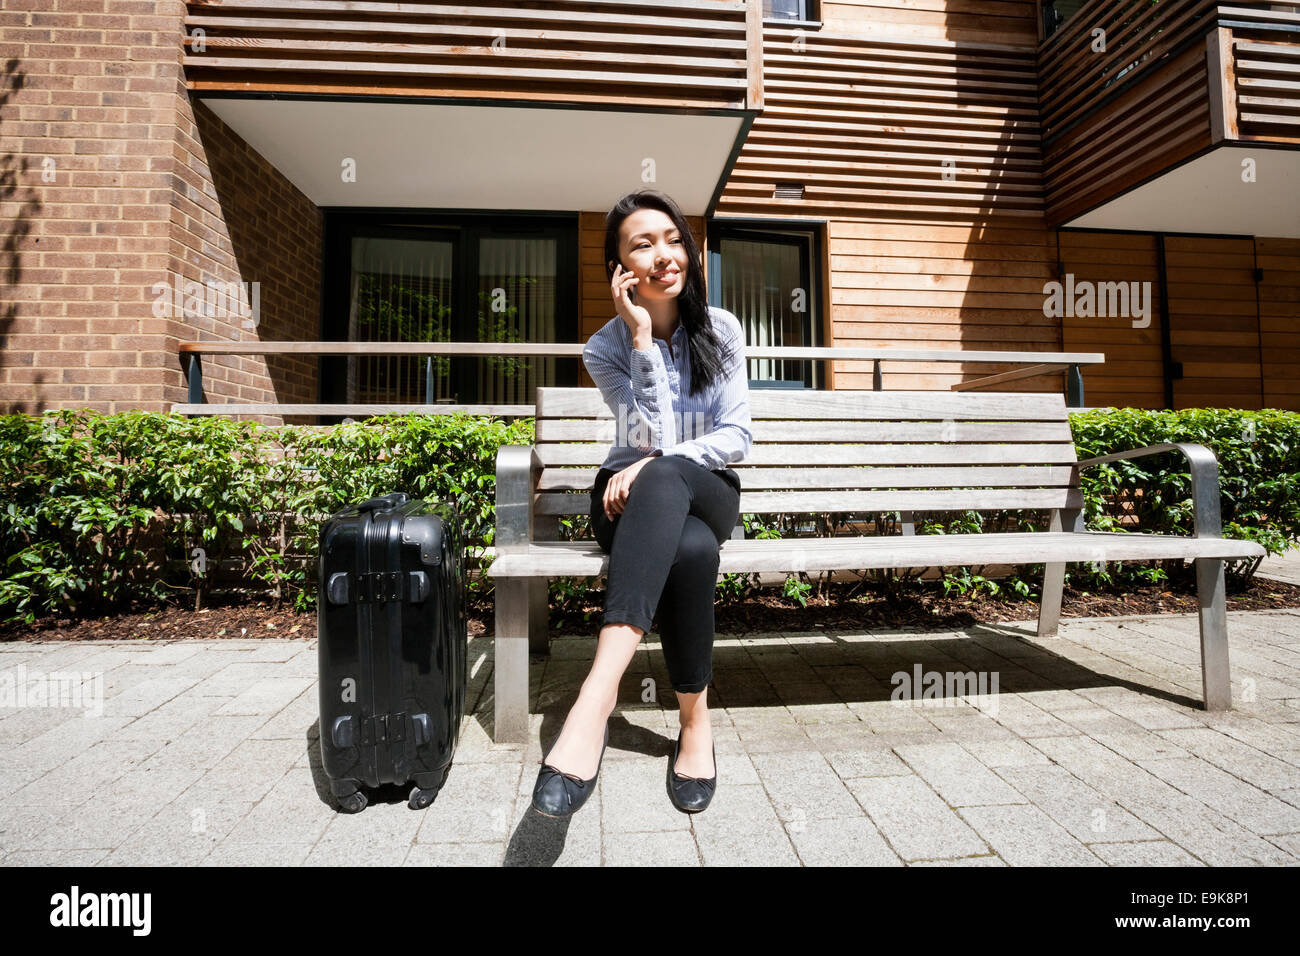 Full length of businesswoman answering cell phone while sitting by luggage on bench against building Stock Photo